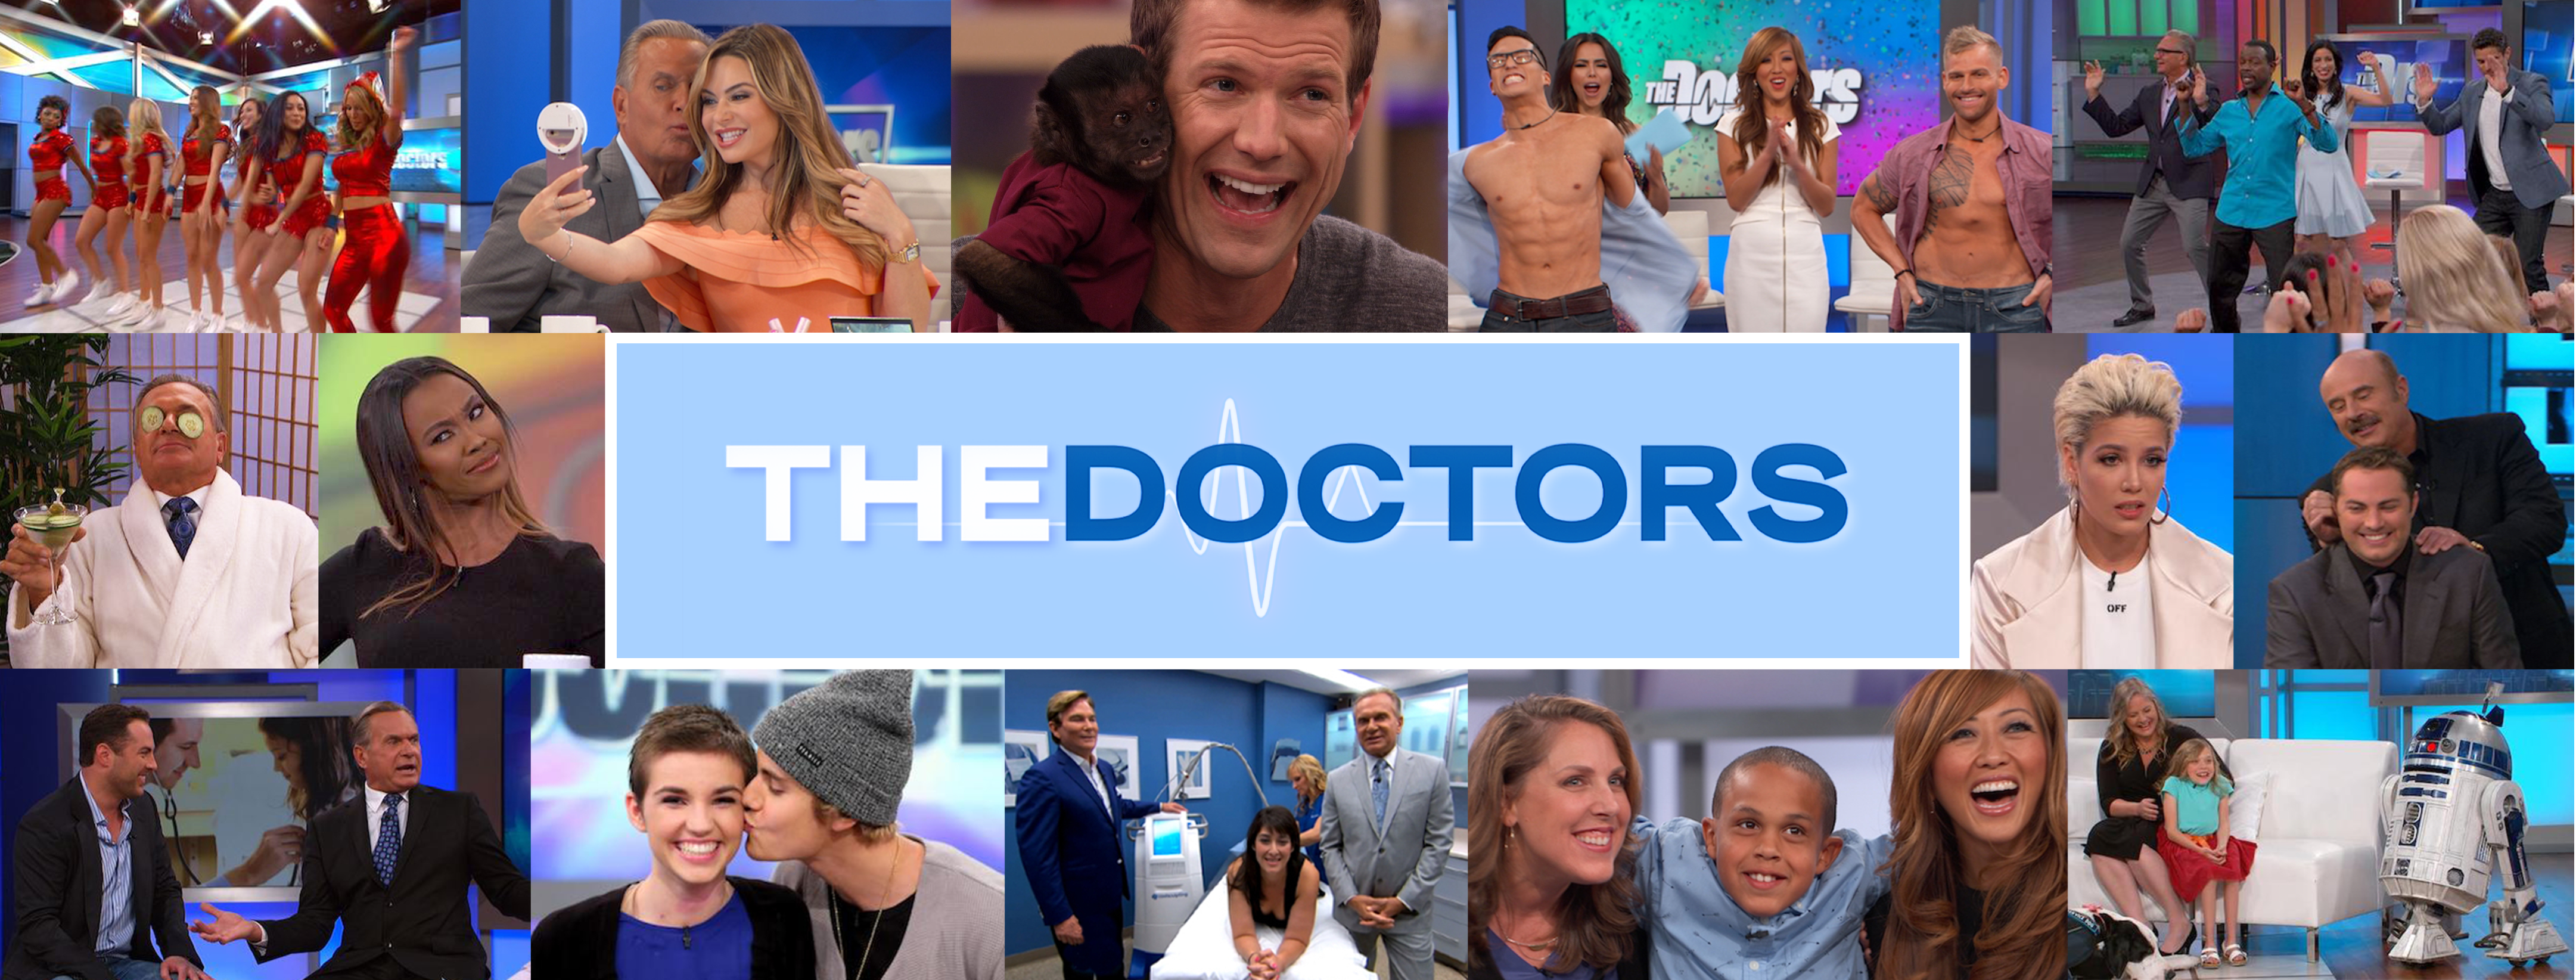 New Surgery to Get Trendy Bedroom Eyes? The Doctors TV Show